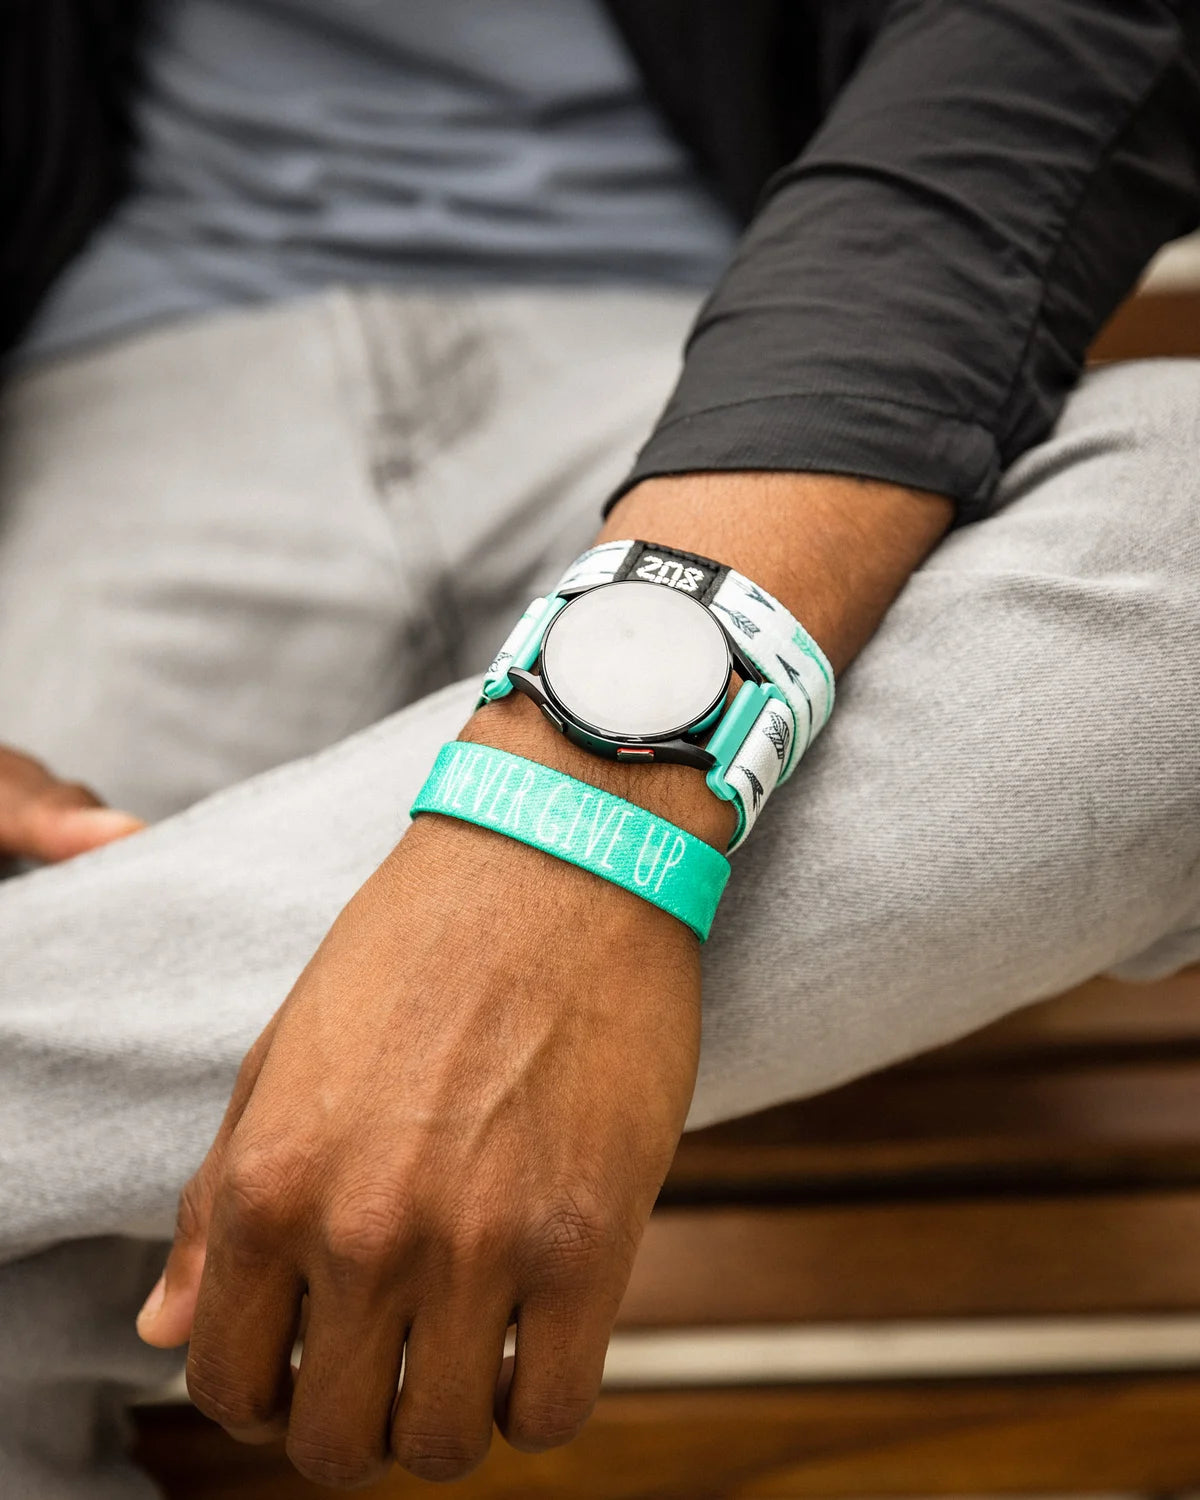 The Science of Motivation: How Positive Messaging on ZOX Watchbands Boosts Productivity